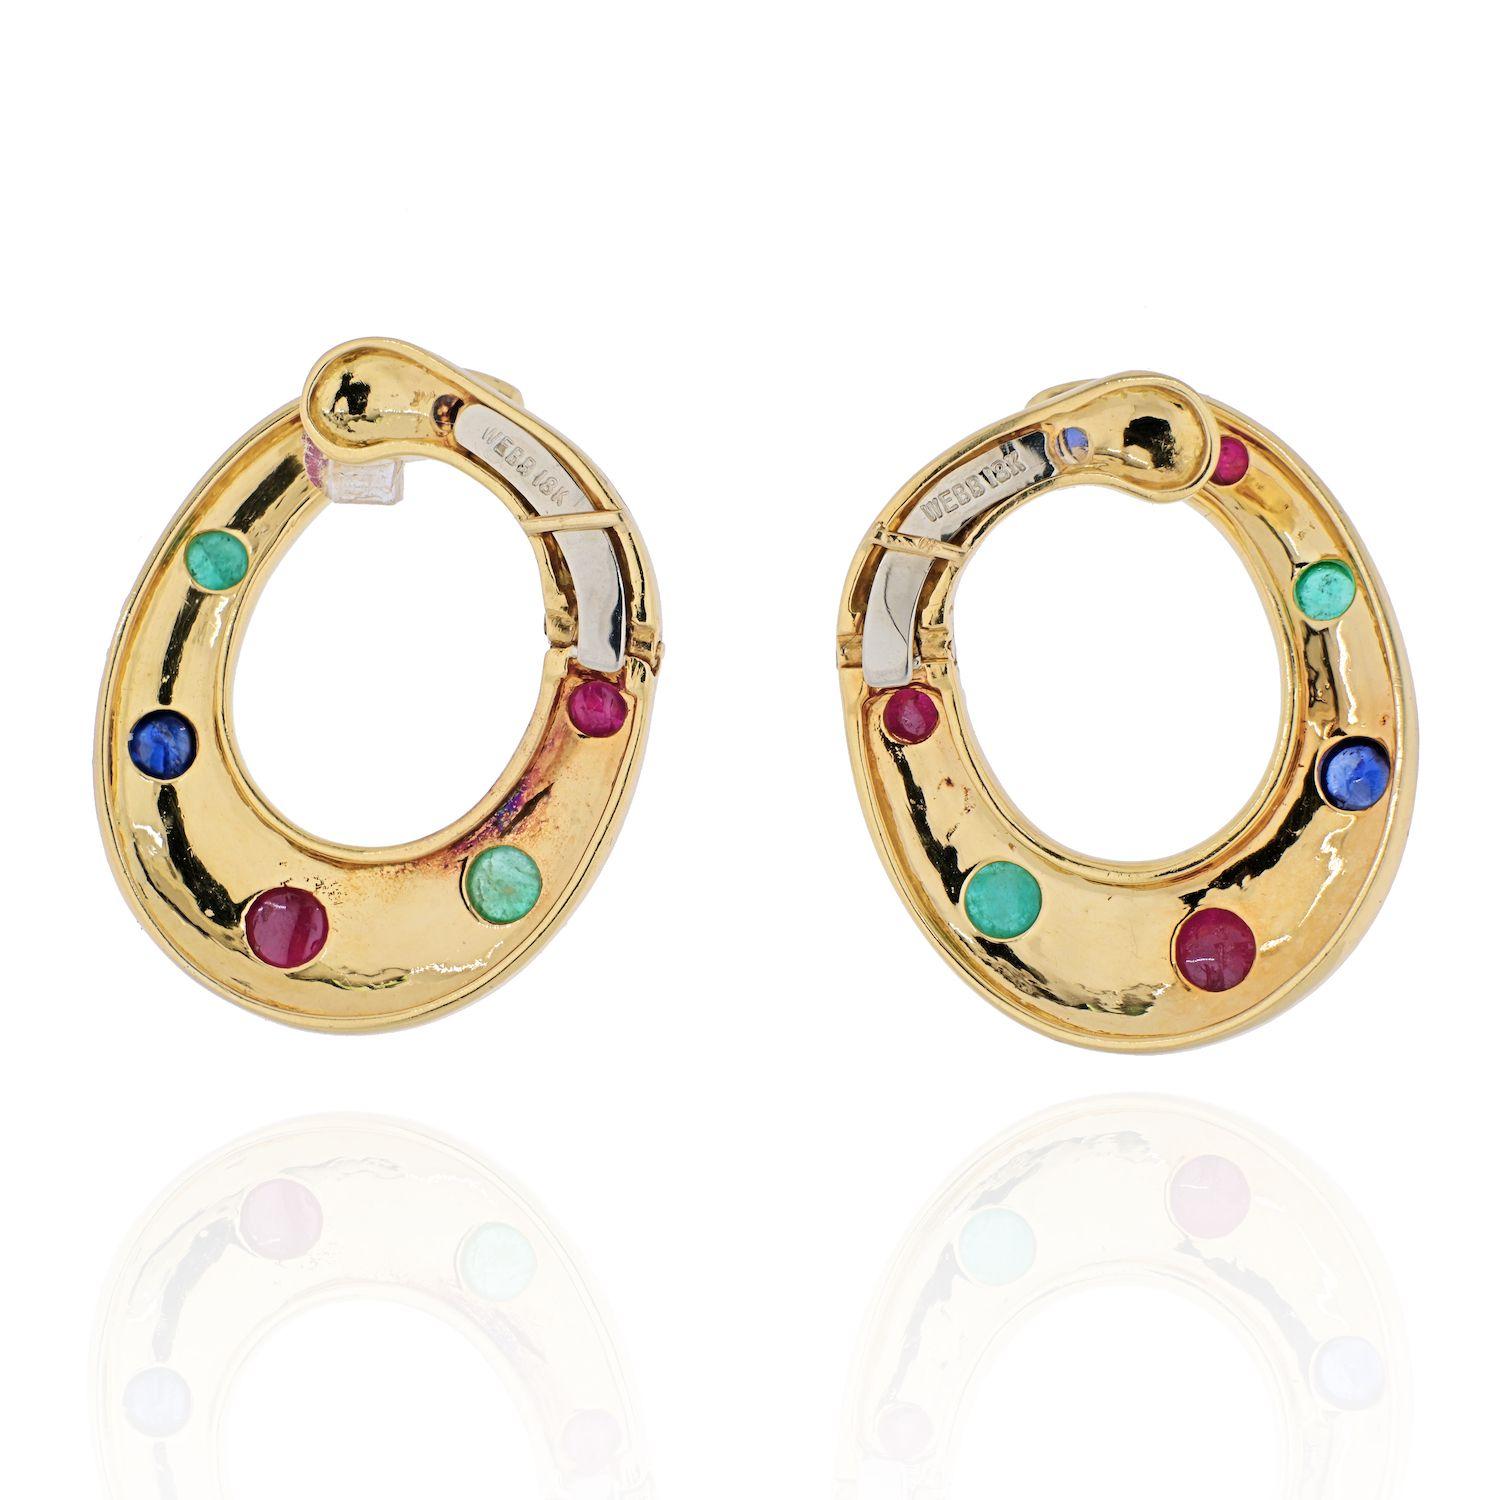 Modern David Webb 18K Yellow Gold Oval Shaped Sapphires, Emeralds and Rubies Earrings